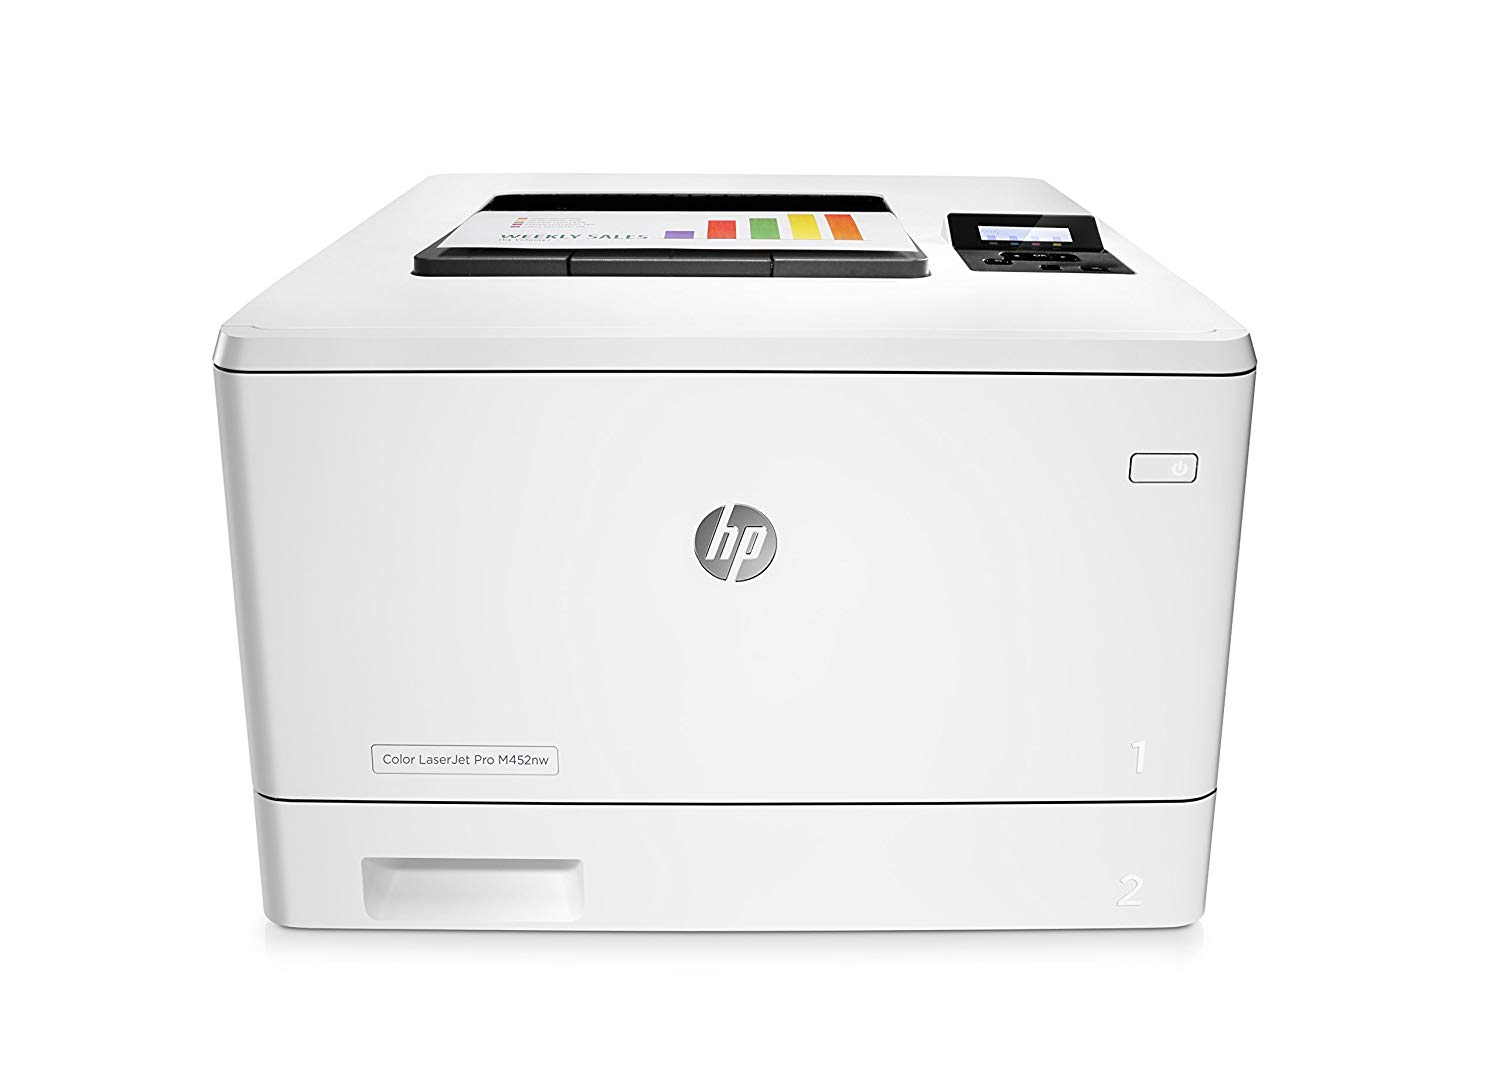 HP Laserjet Pro M452nw Wireless Color Laser Printer with Built-in Ethernet (CF388A) - image 1 of 5